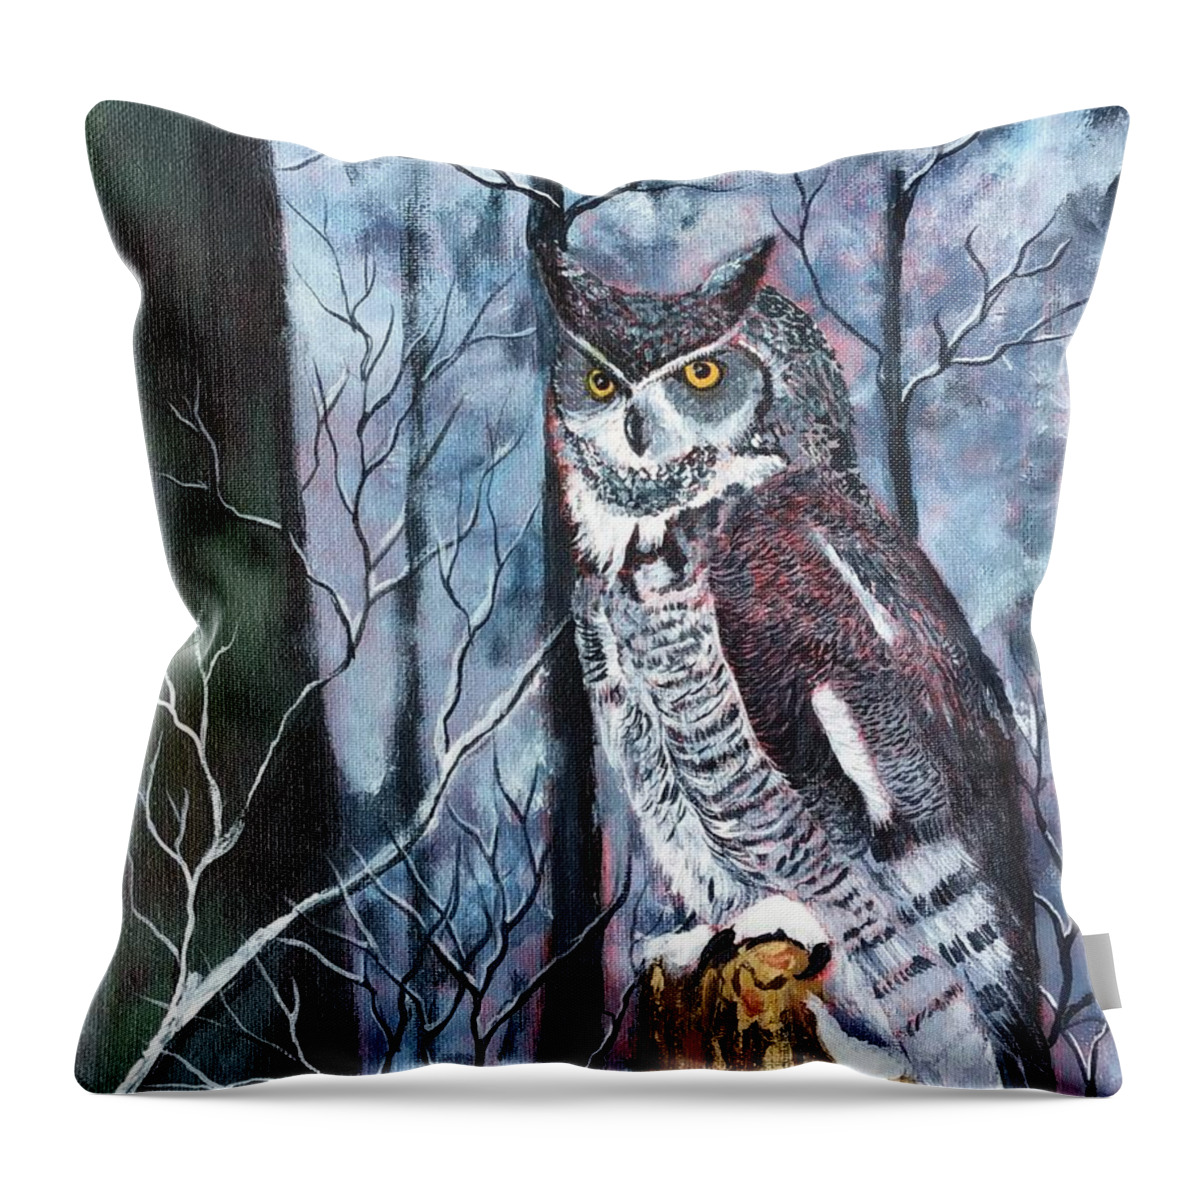 Owl Throw Pillow featuring the painting Great Horned Owl by Tami Booher